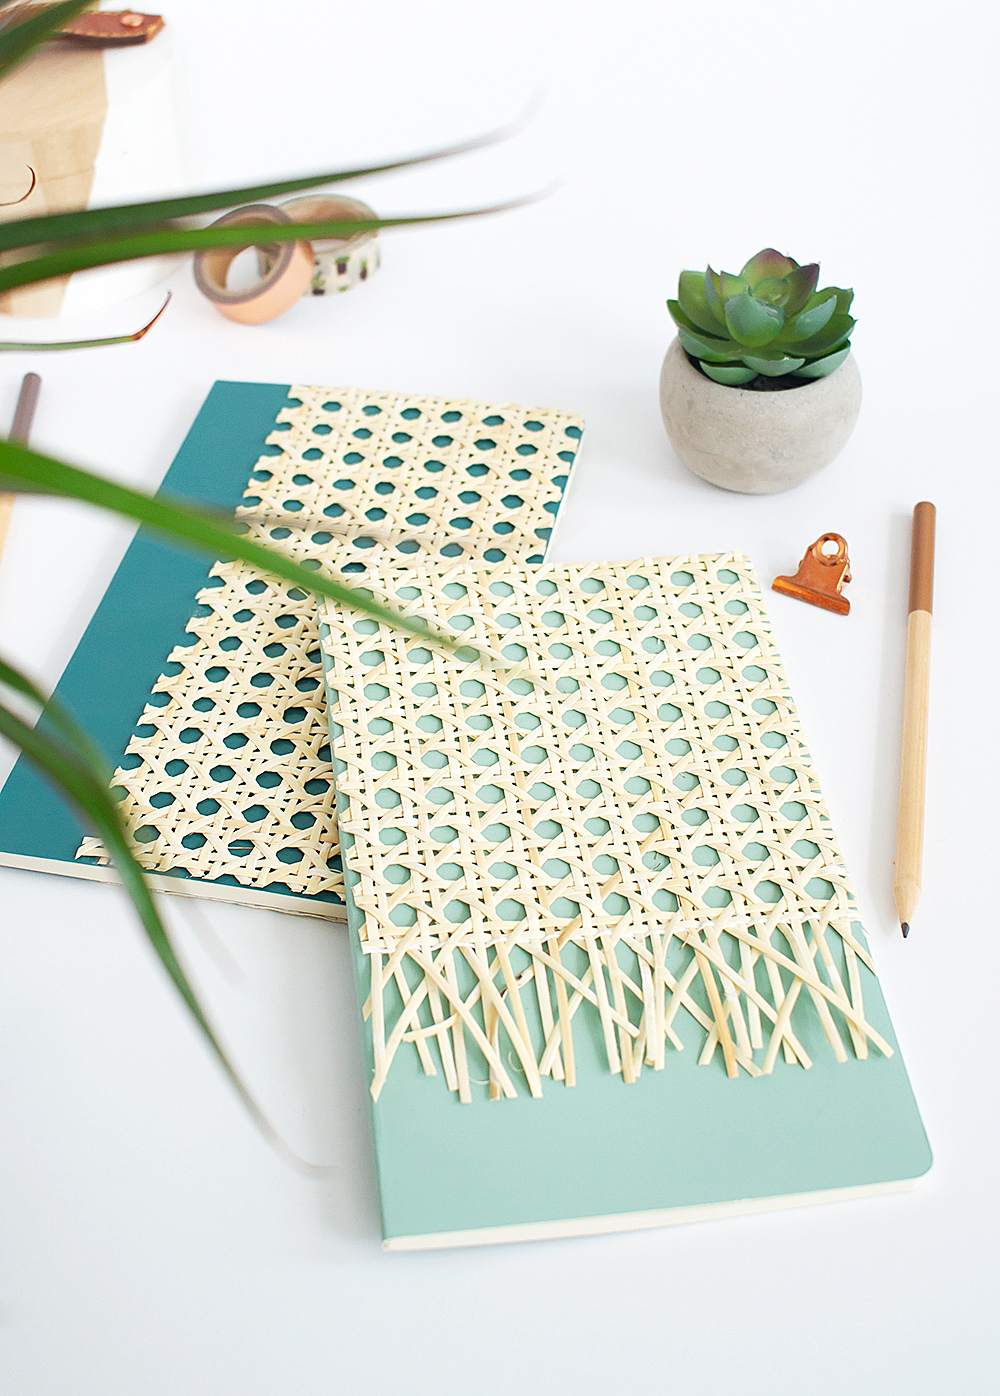 How to use cane webbing to make DIY rattan notebooks - a modern take on a vintage material!